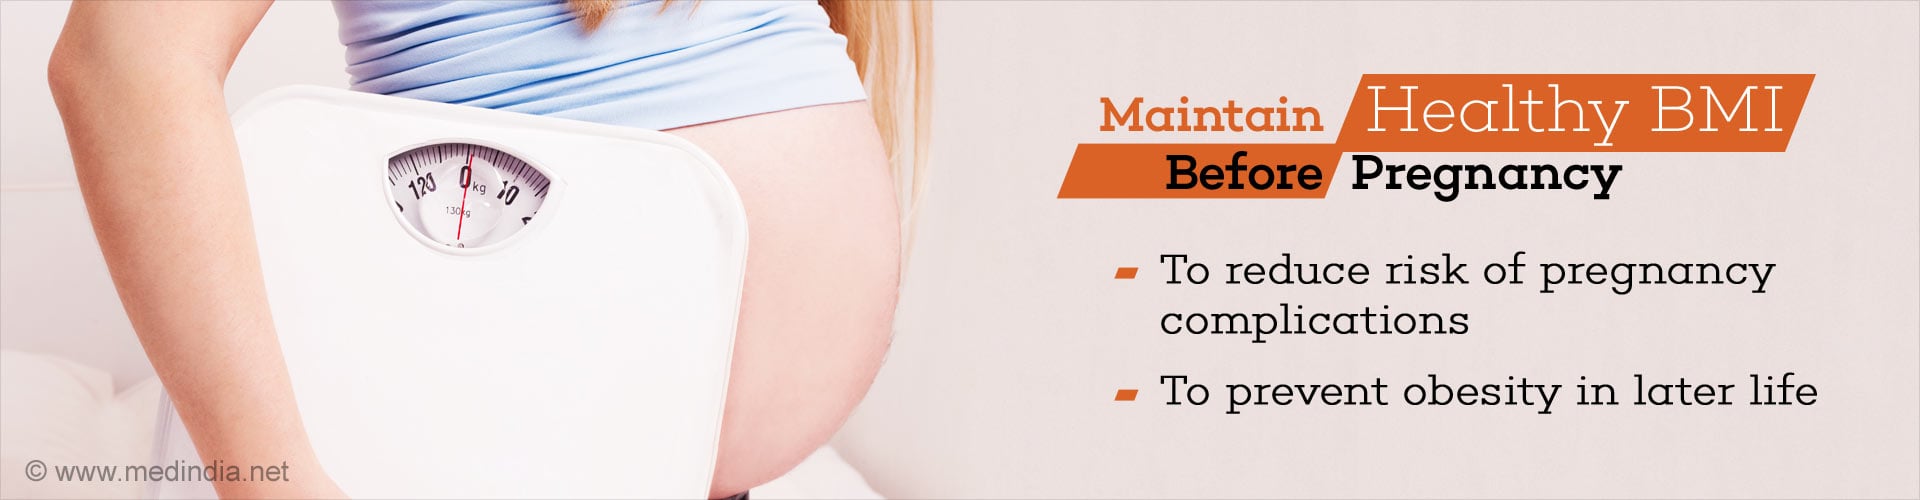 Maintain Healthy BMI Before Pregnancy
- To reduce risk of pregnancy complications
- To prevent obesity in later life